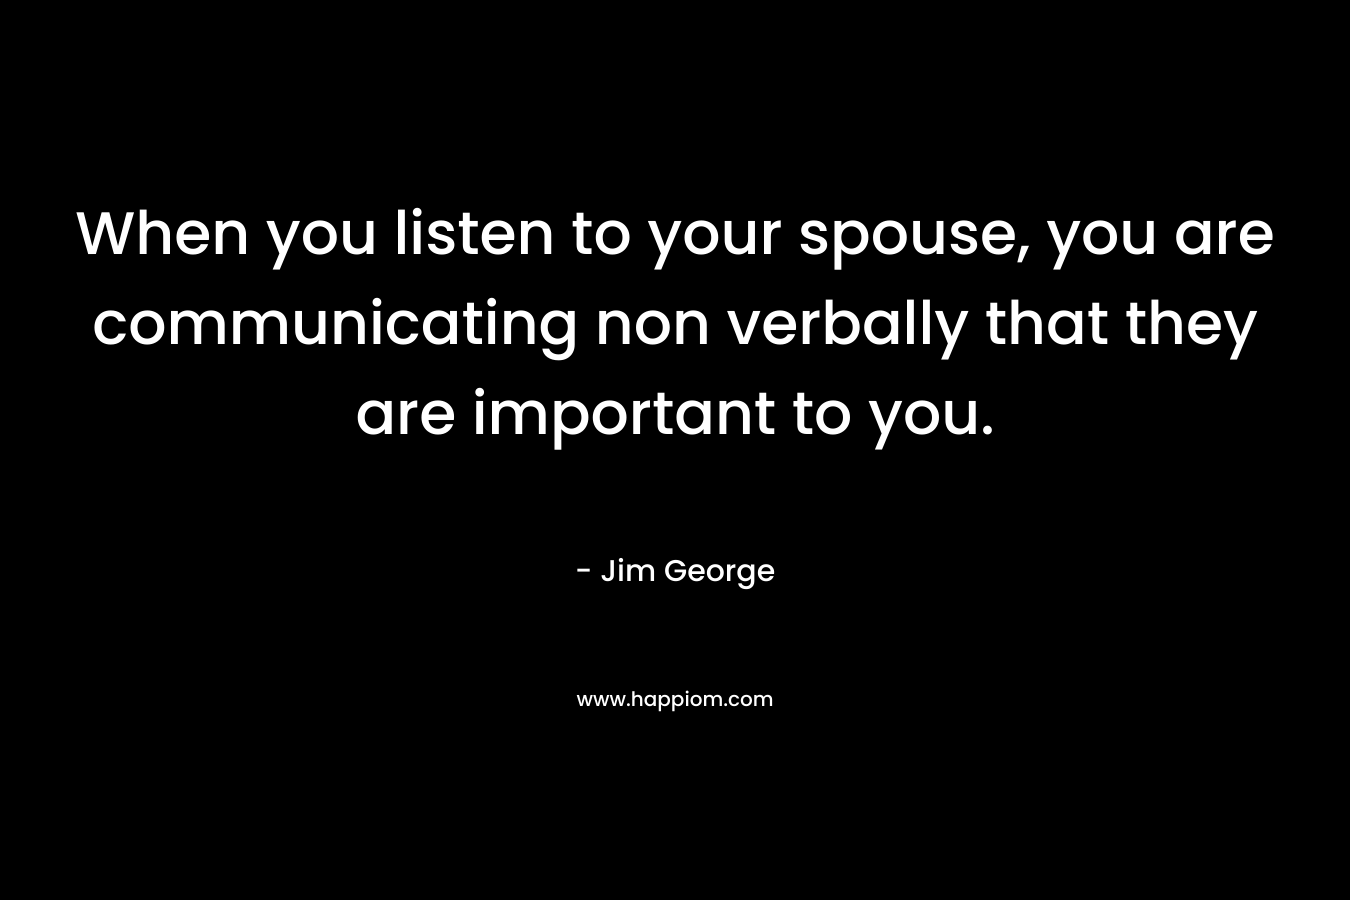 When you listen to your spouse, you are communicating non verbally that they are important to you. – Jim George